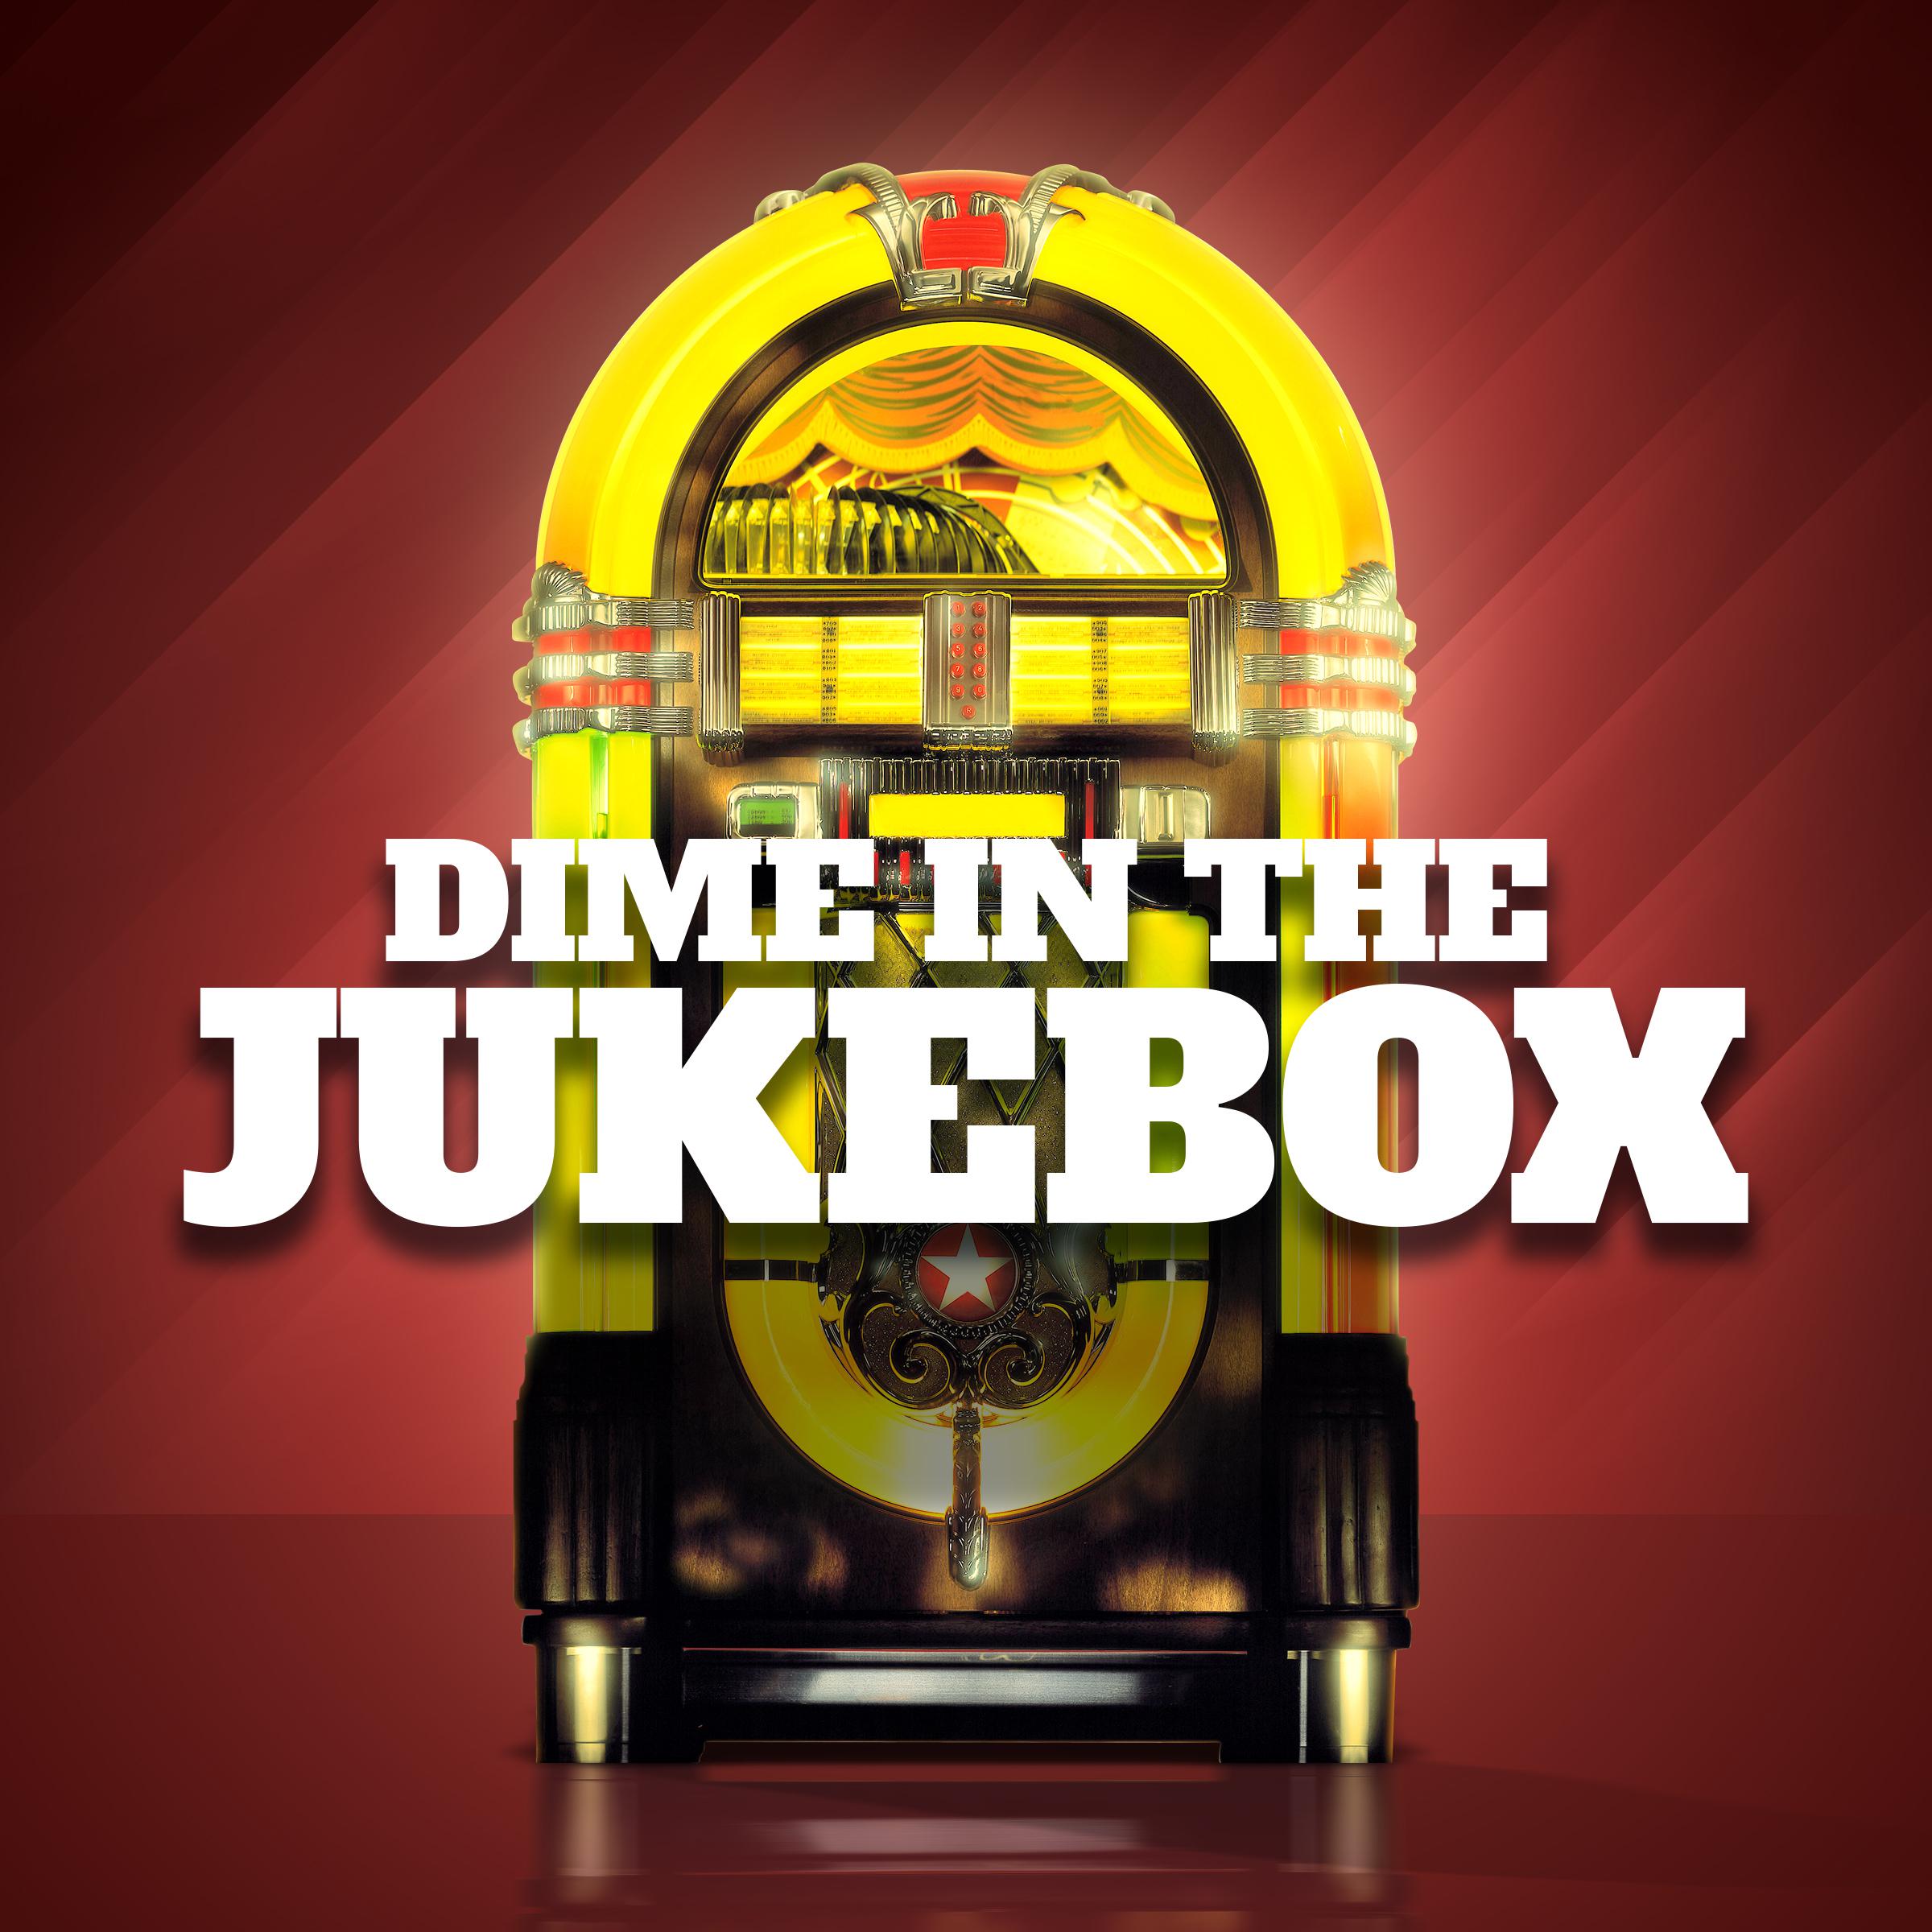 Dime in the Jukebox